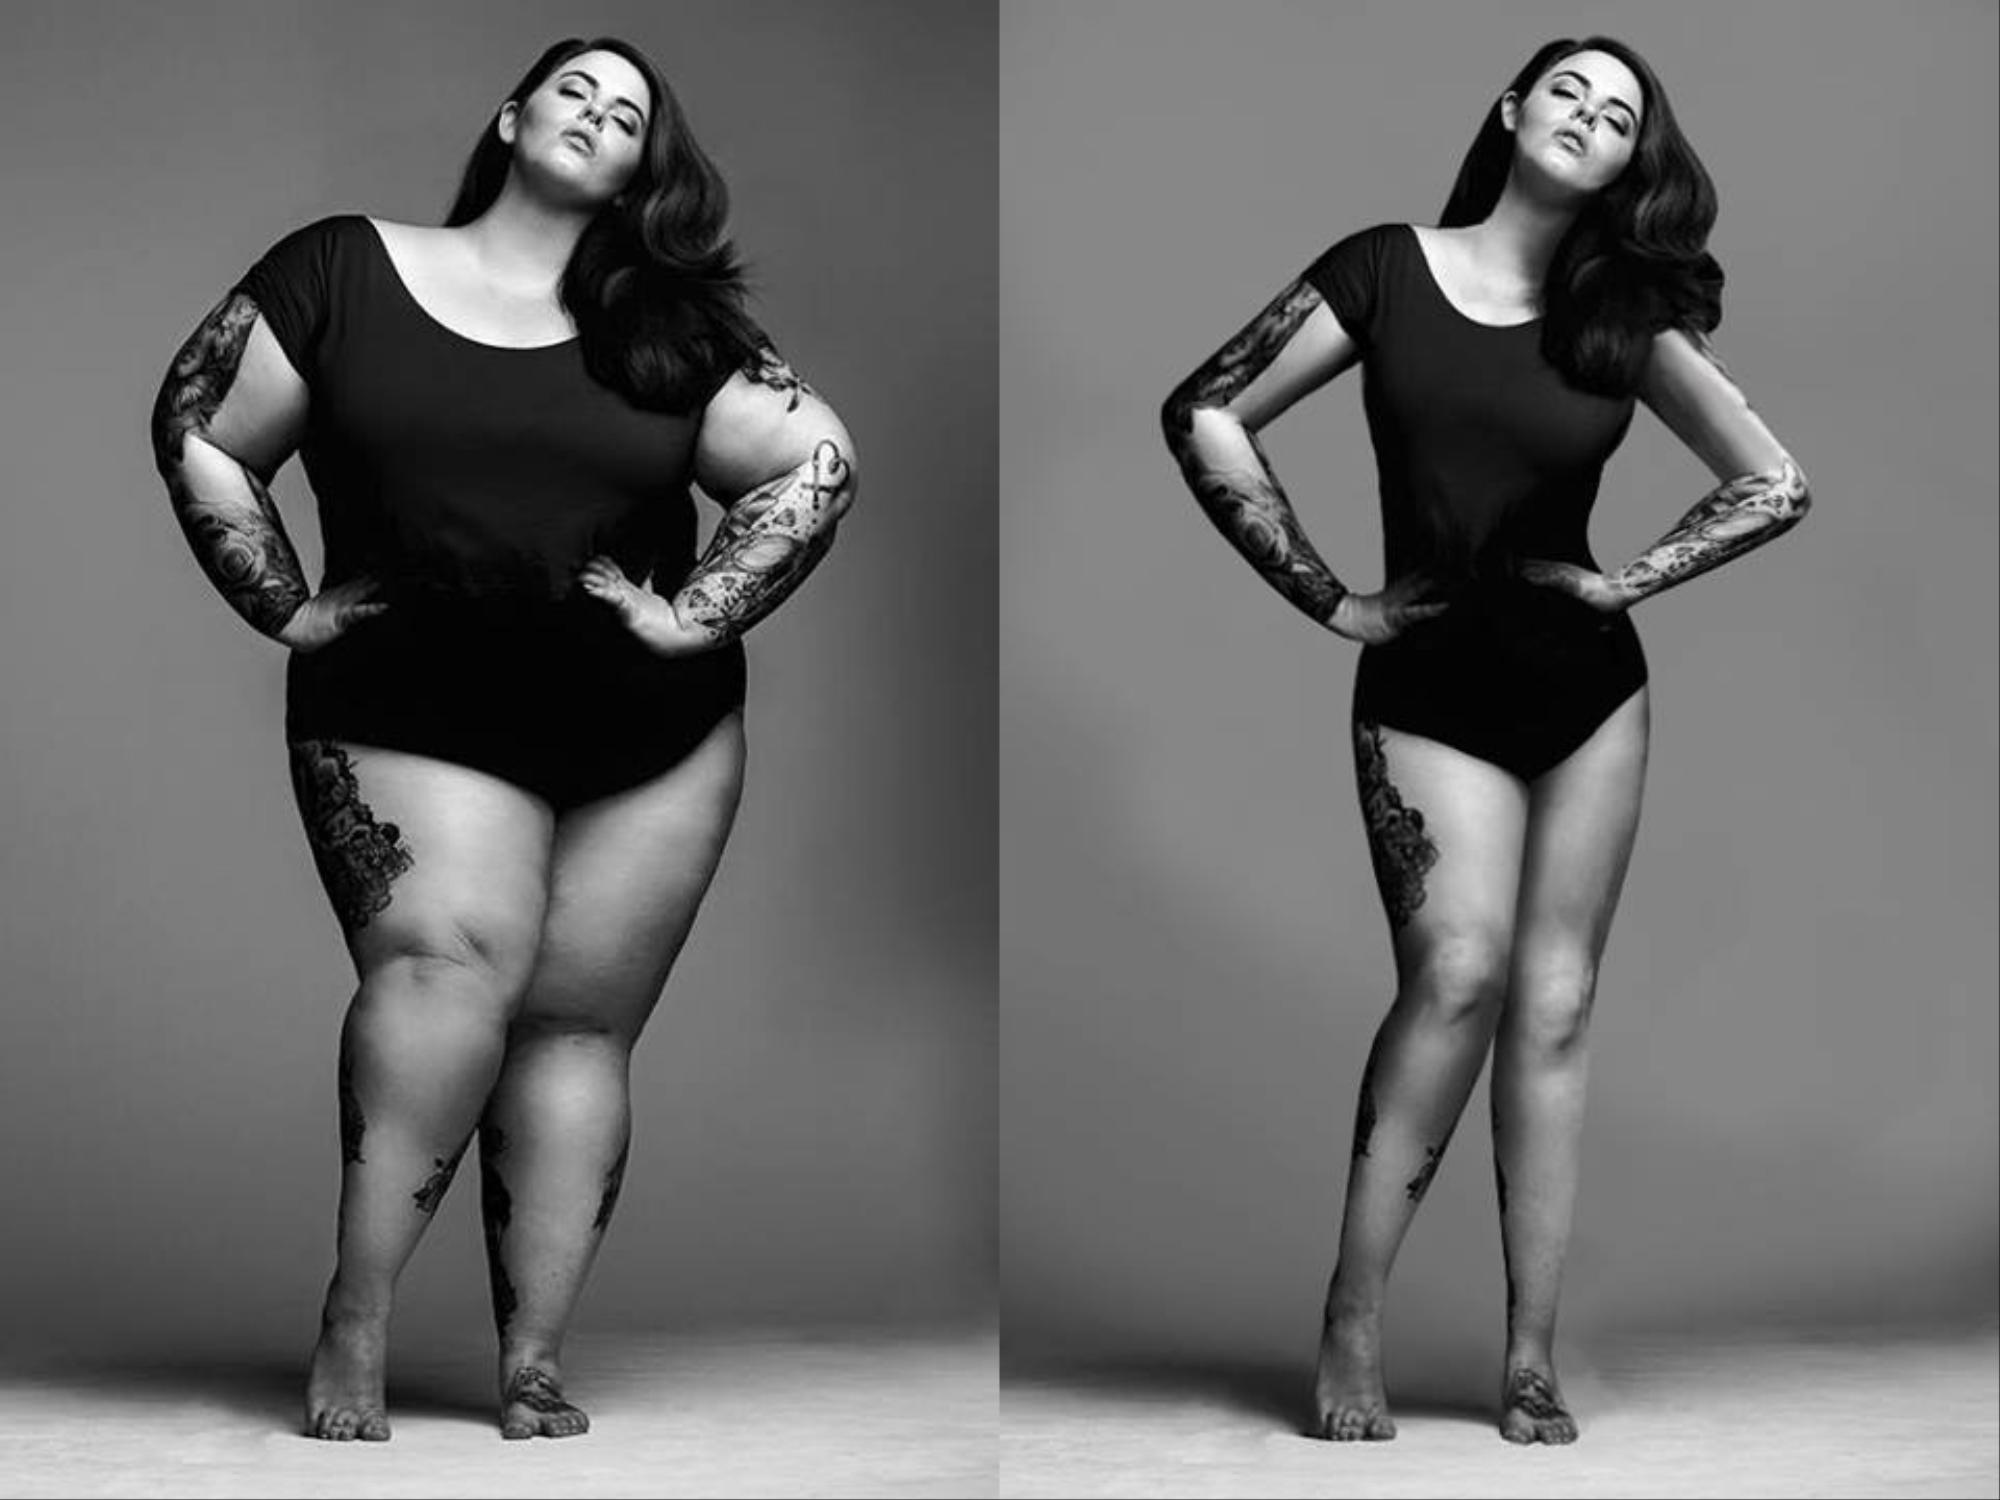 This Reprehensible Online Group Is Photoshopping Plus Size Models